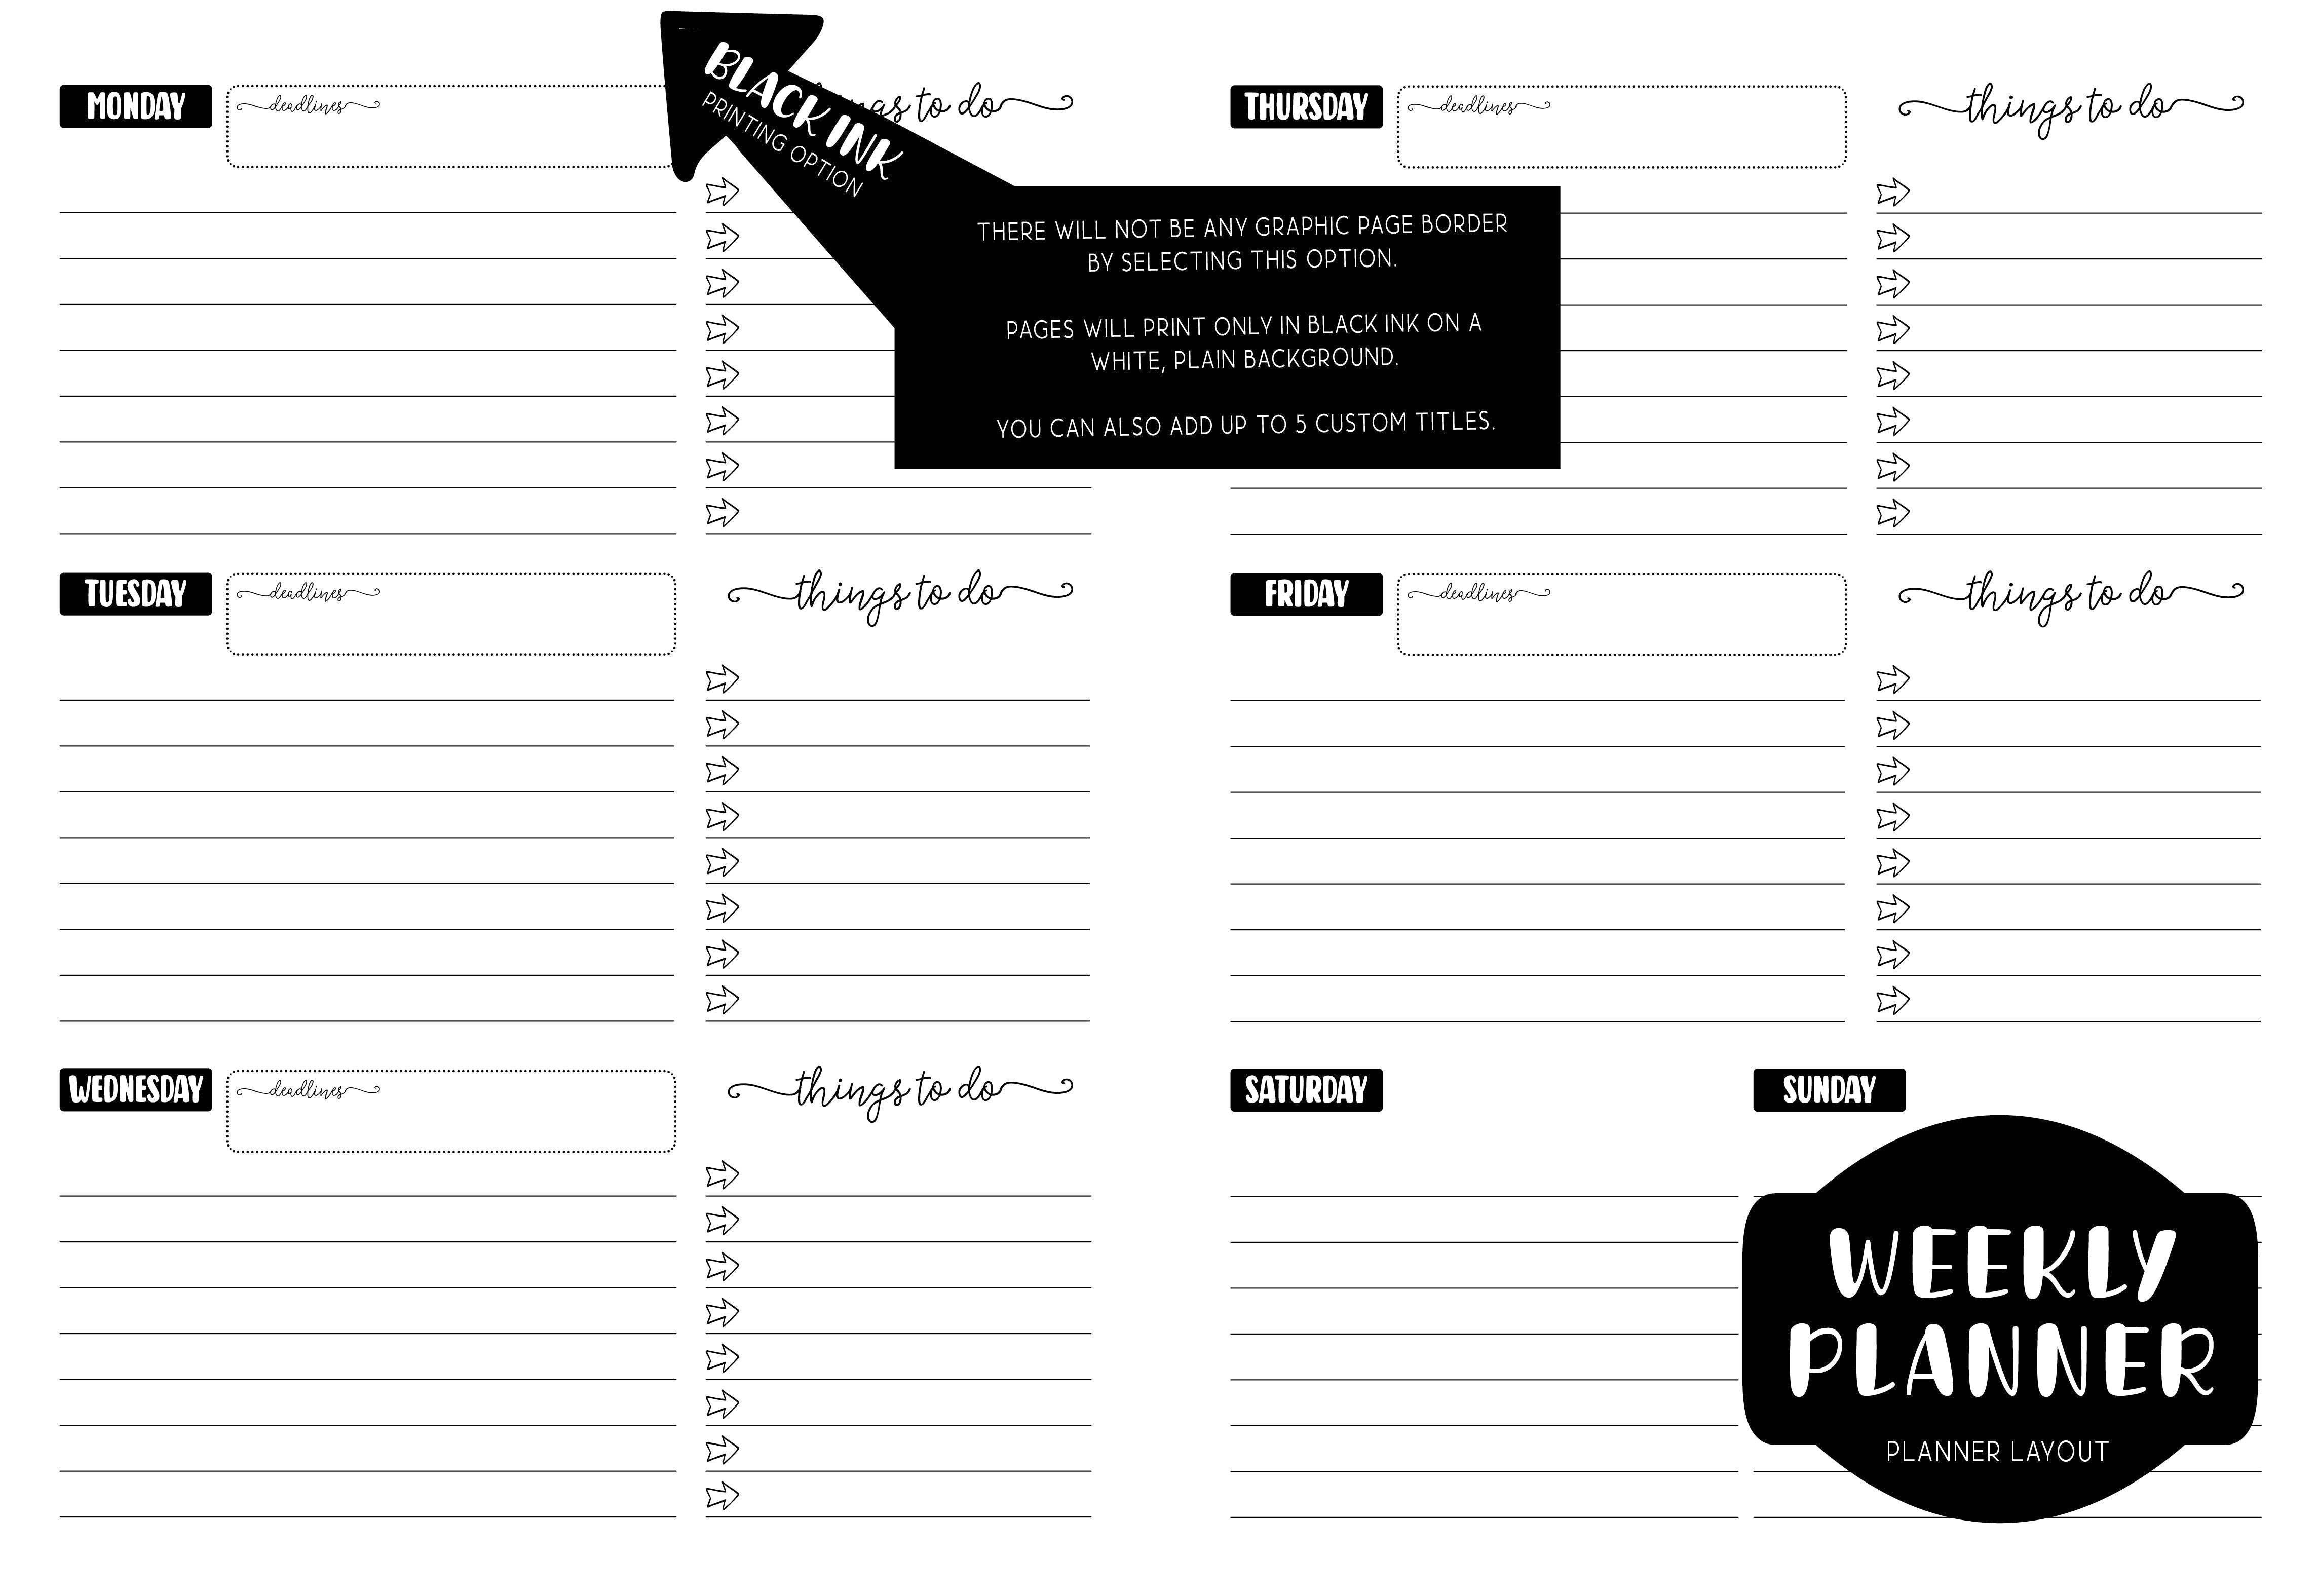 Weekly Planner - HIGHLAND NAVY FLORAL